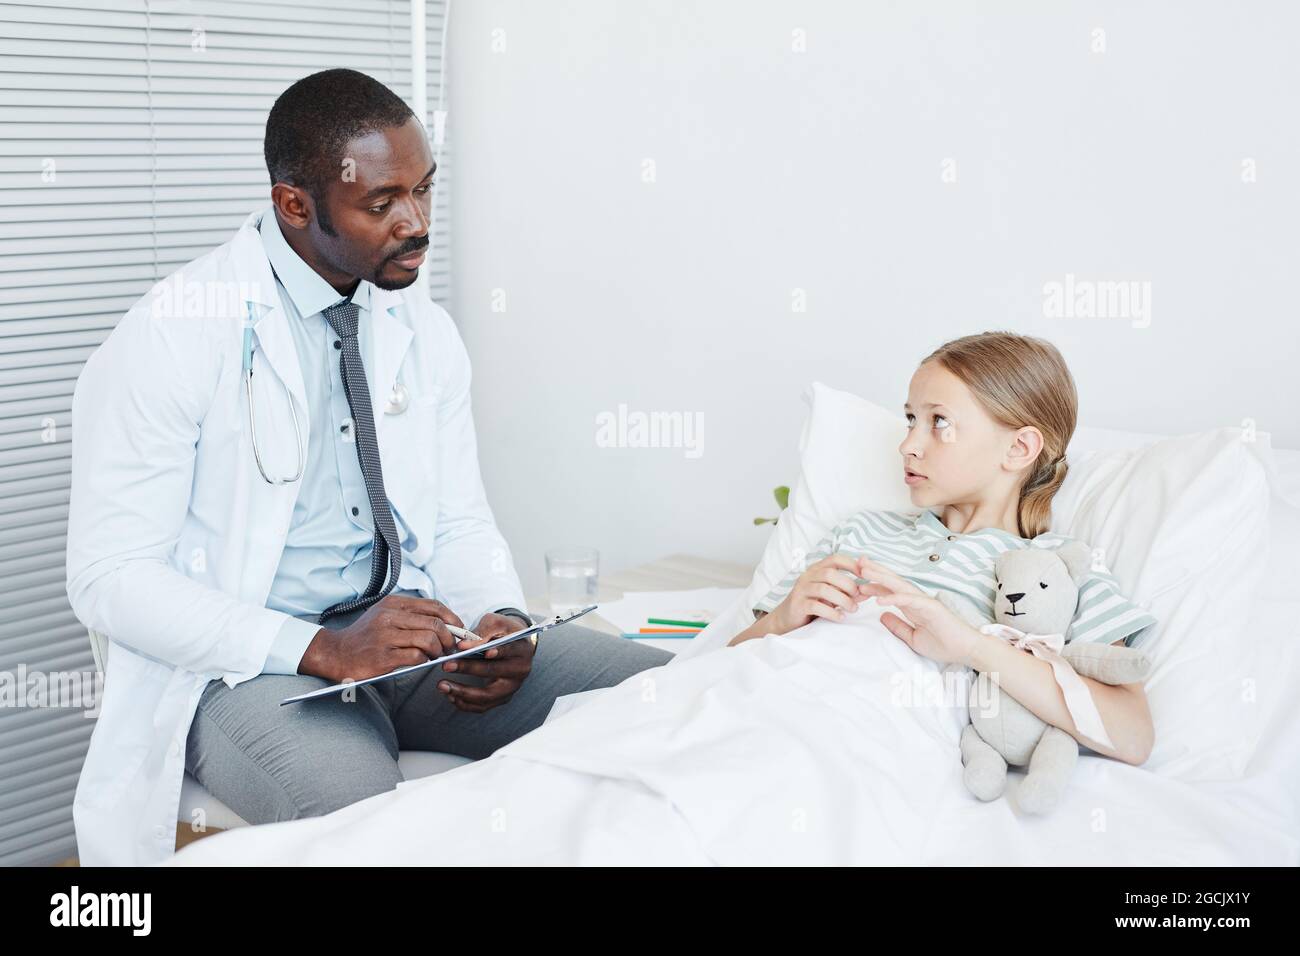 Portrait of young African-American doctor talking to little girl lying in hospital bed, copy space Stock Photo